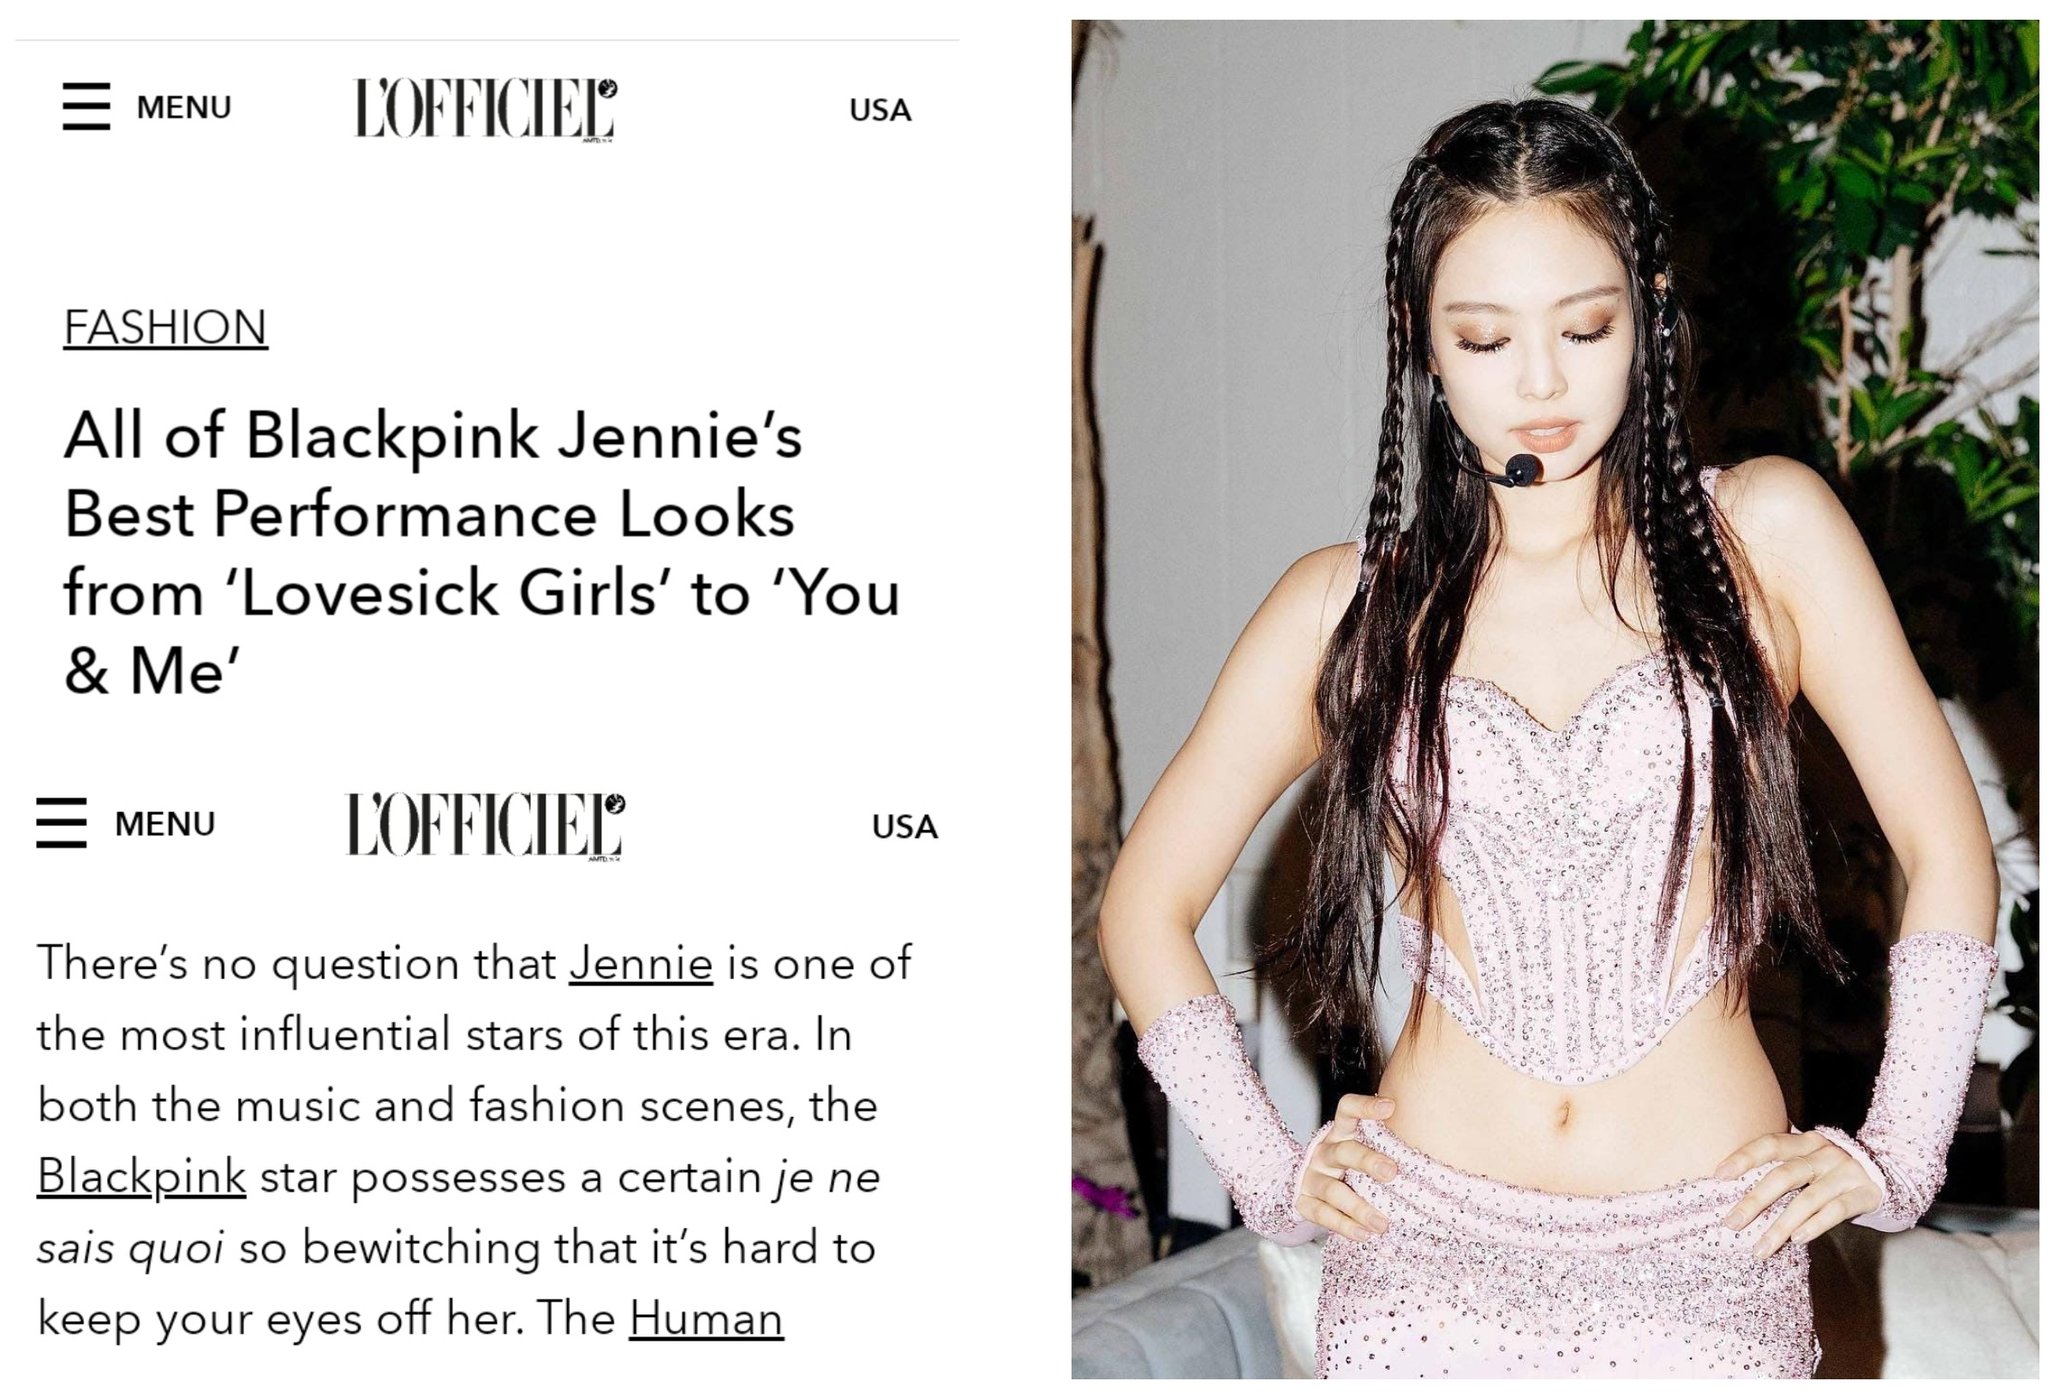 All of Blackpink Jennie's Best Performance Looks from 'Lovesick Girls' to  'You & Me